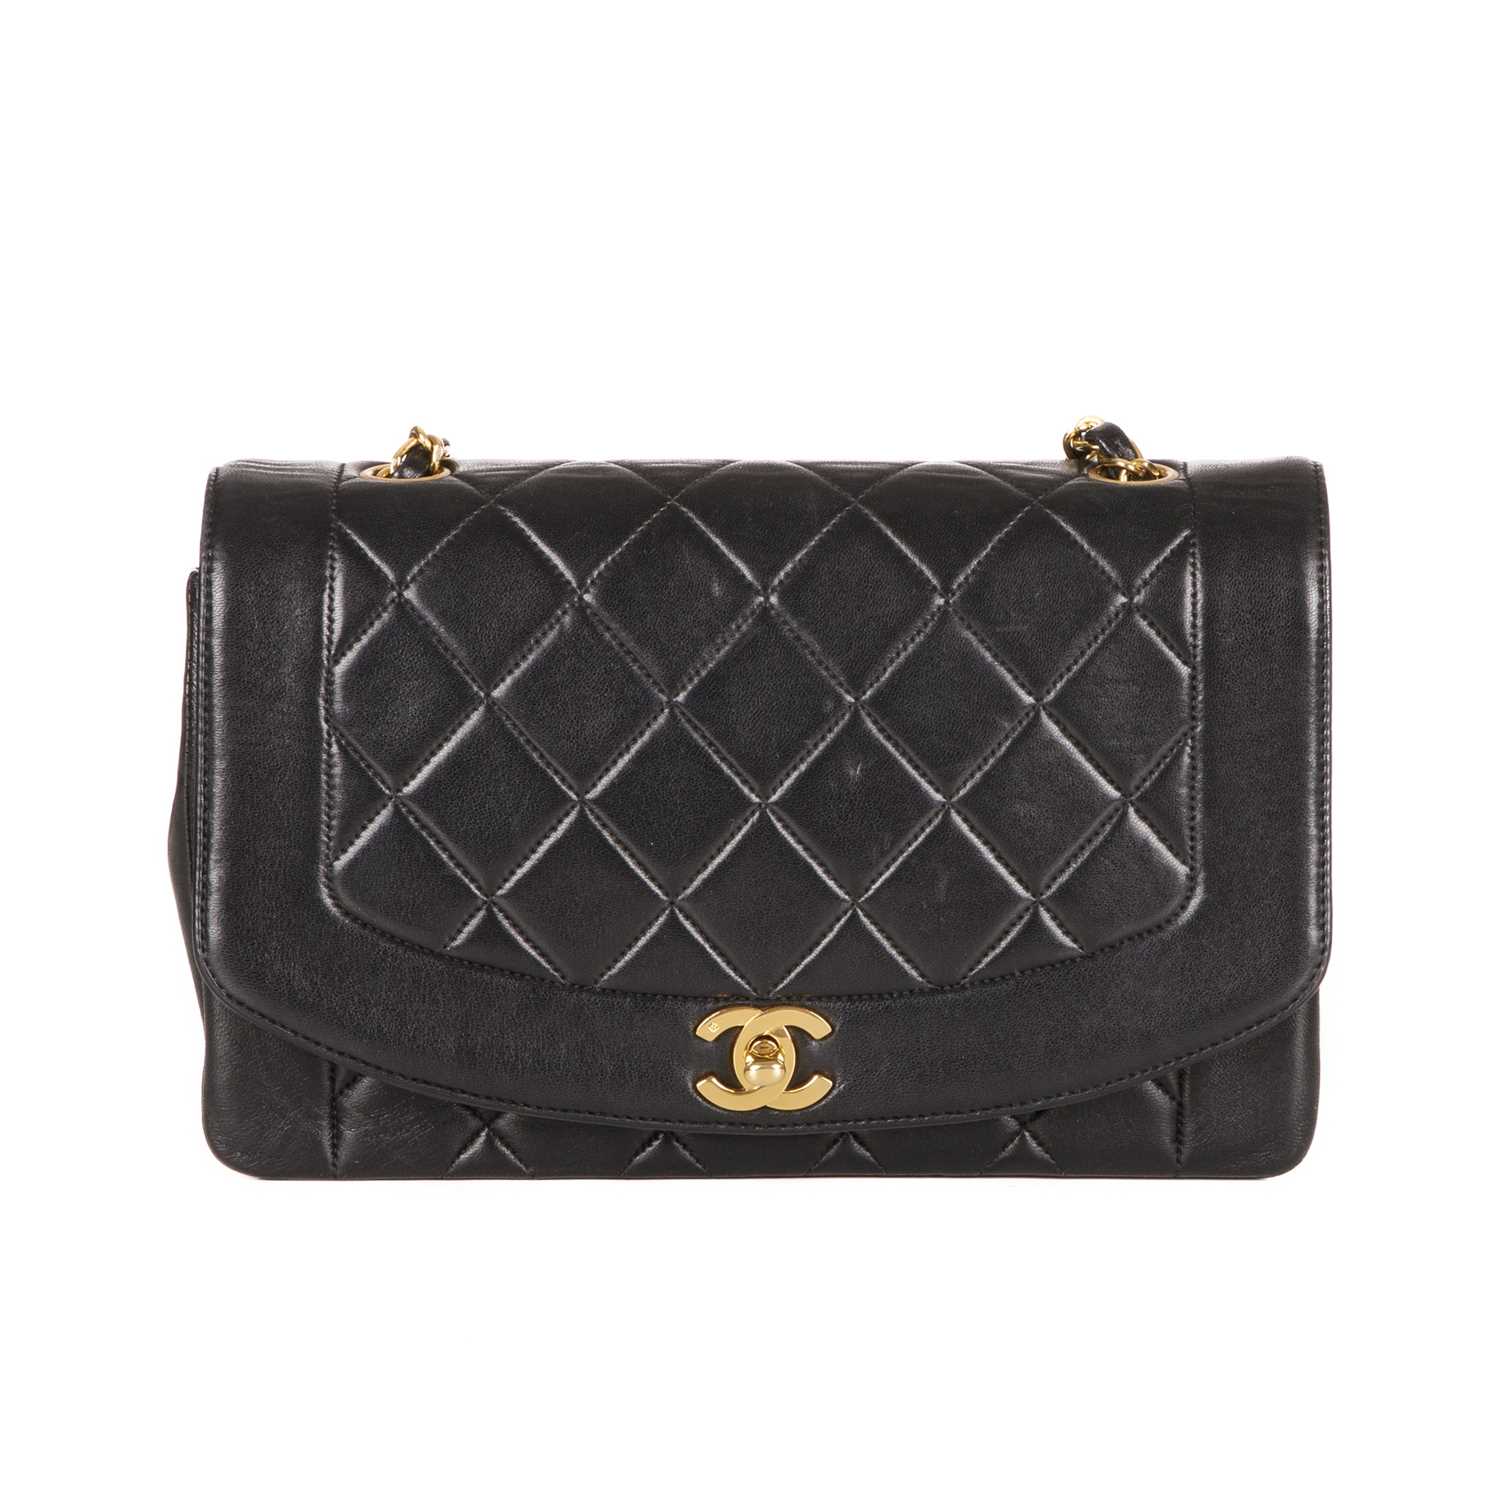 Chanel, a vintage Diana Flap handbag, designed with a diamond quilted black lambskin leather